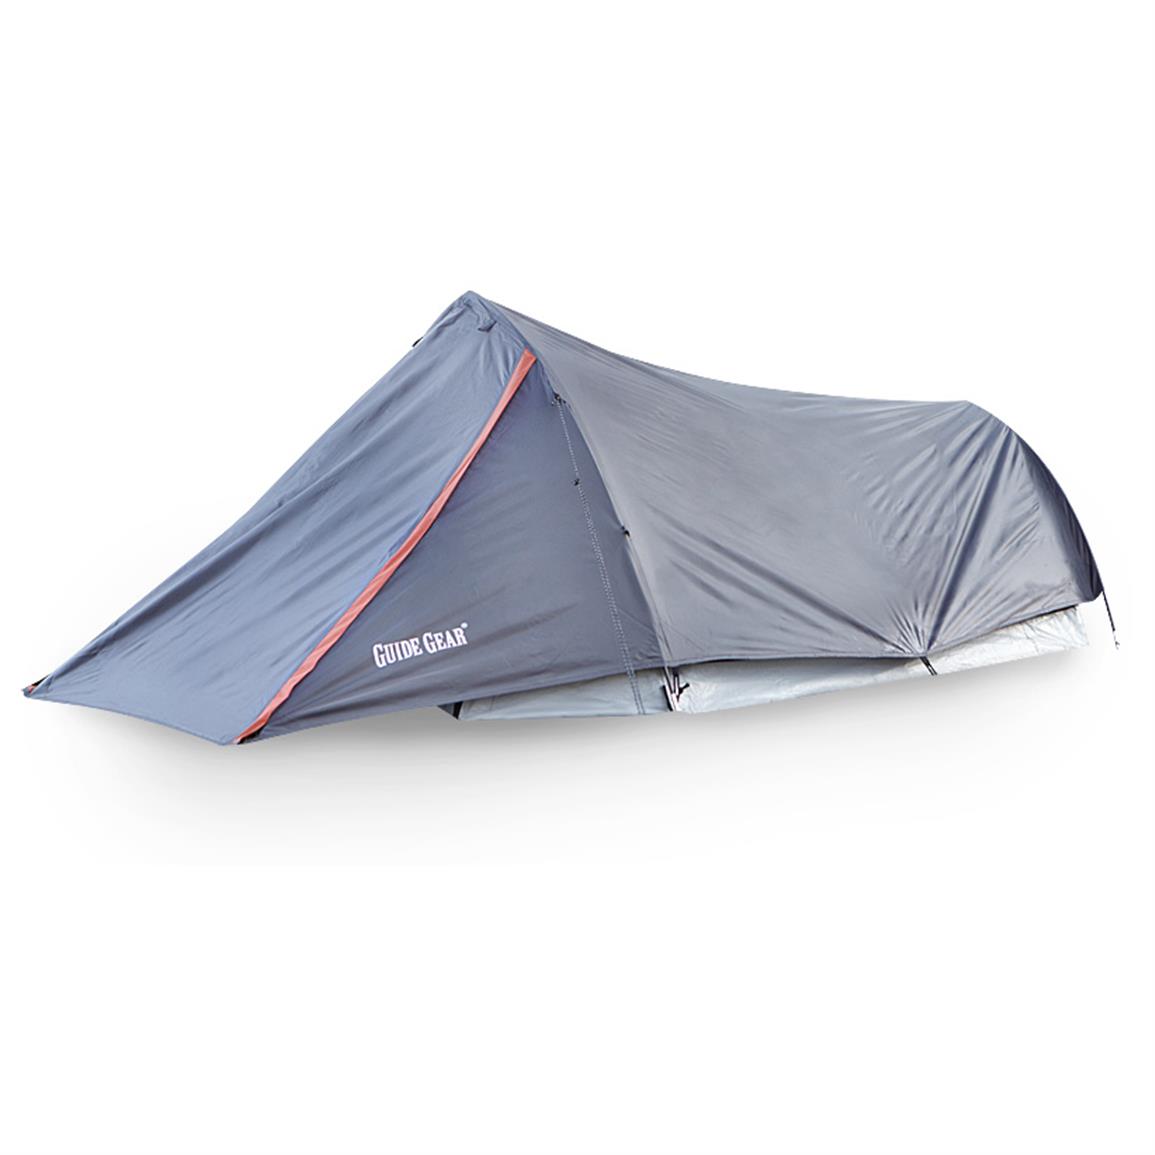 Guide Gear Bivy Tent